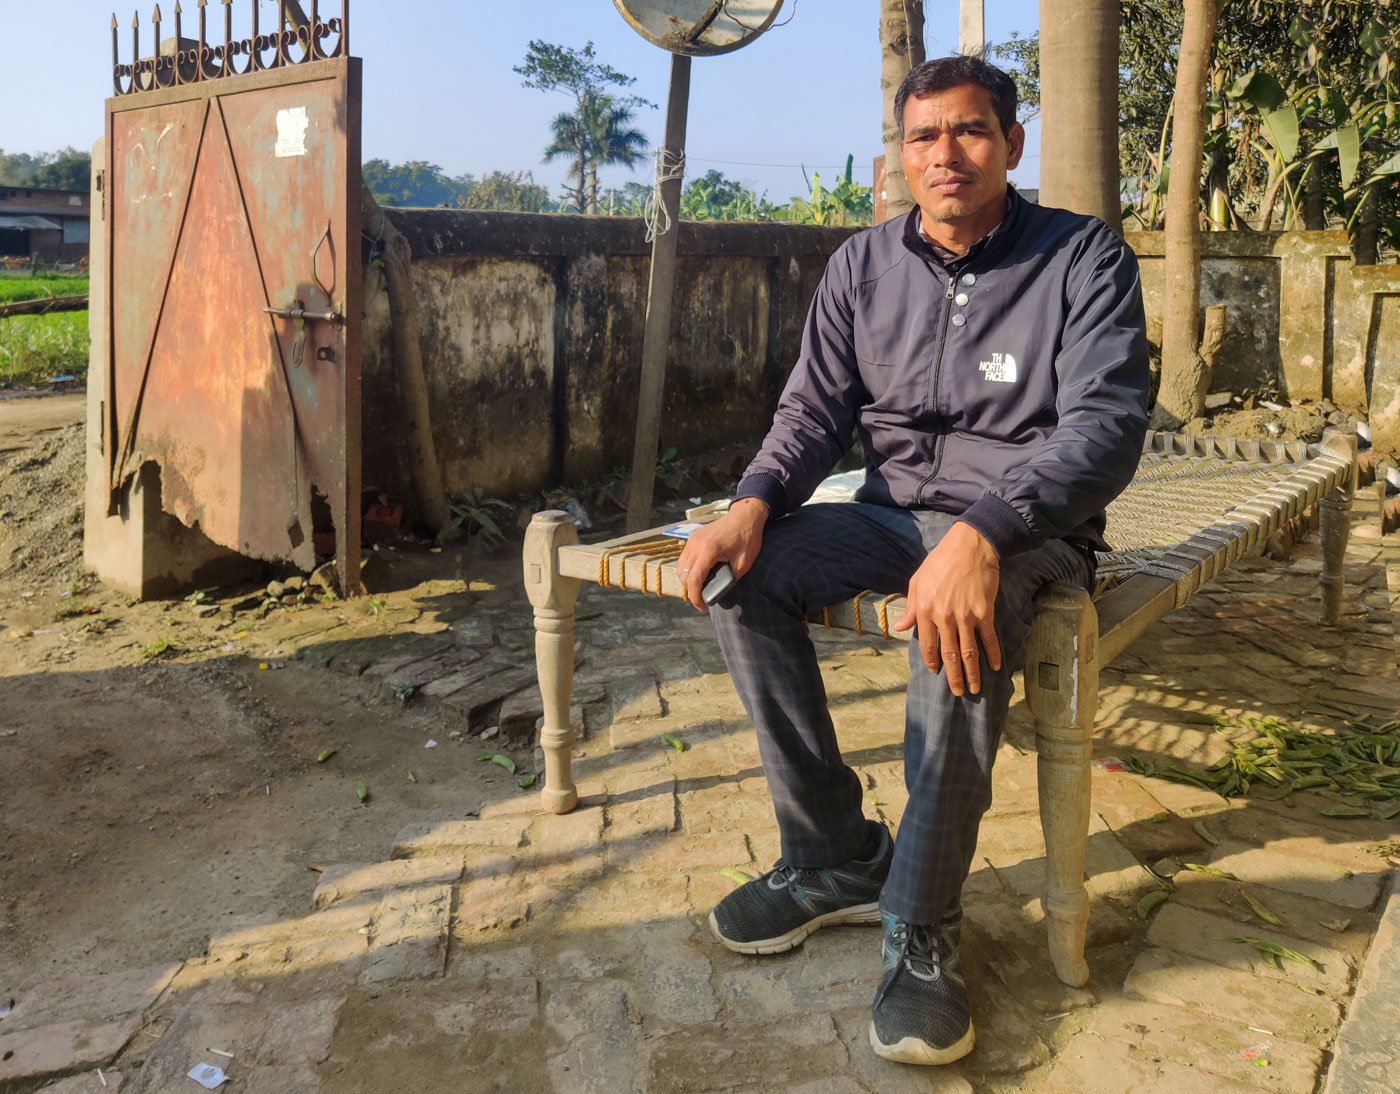 Jai Bahadur Rana, the pradhan of Bankati, is among the village's many residents who seek treatment at Seti Zonal Hospital in Nepal. "The doctors and facilities at Seti are far better," he says